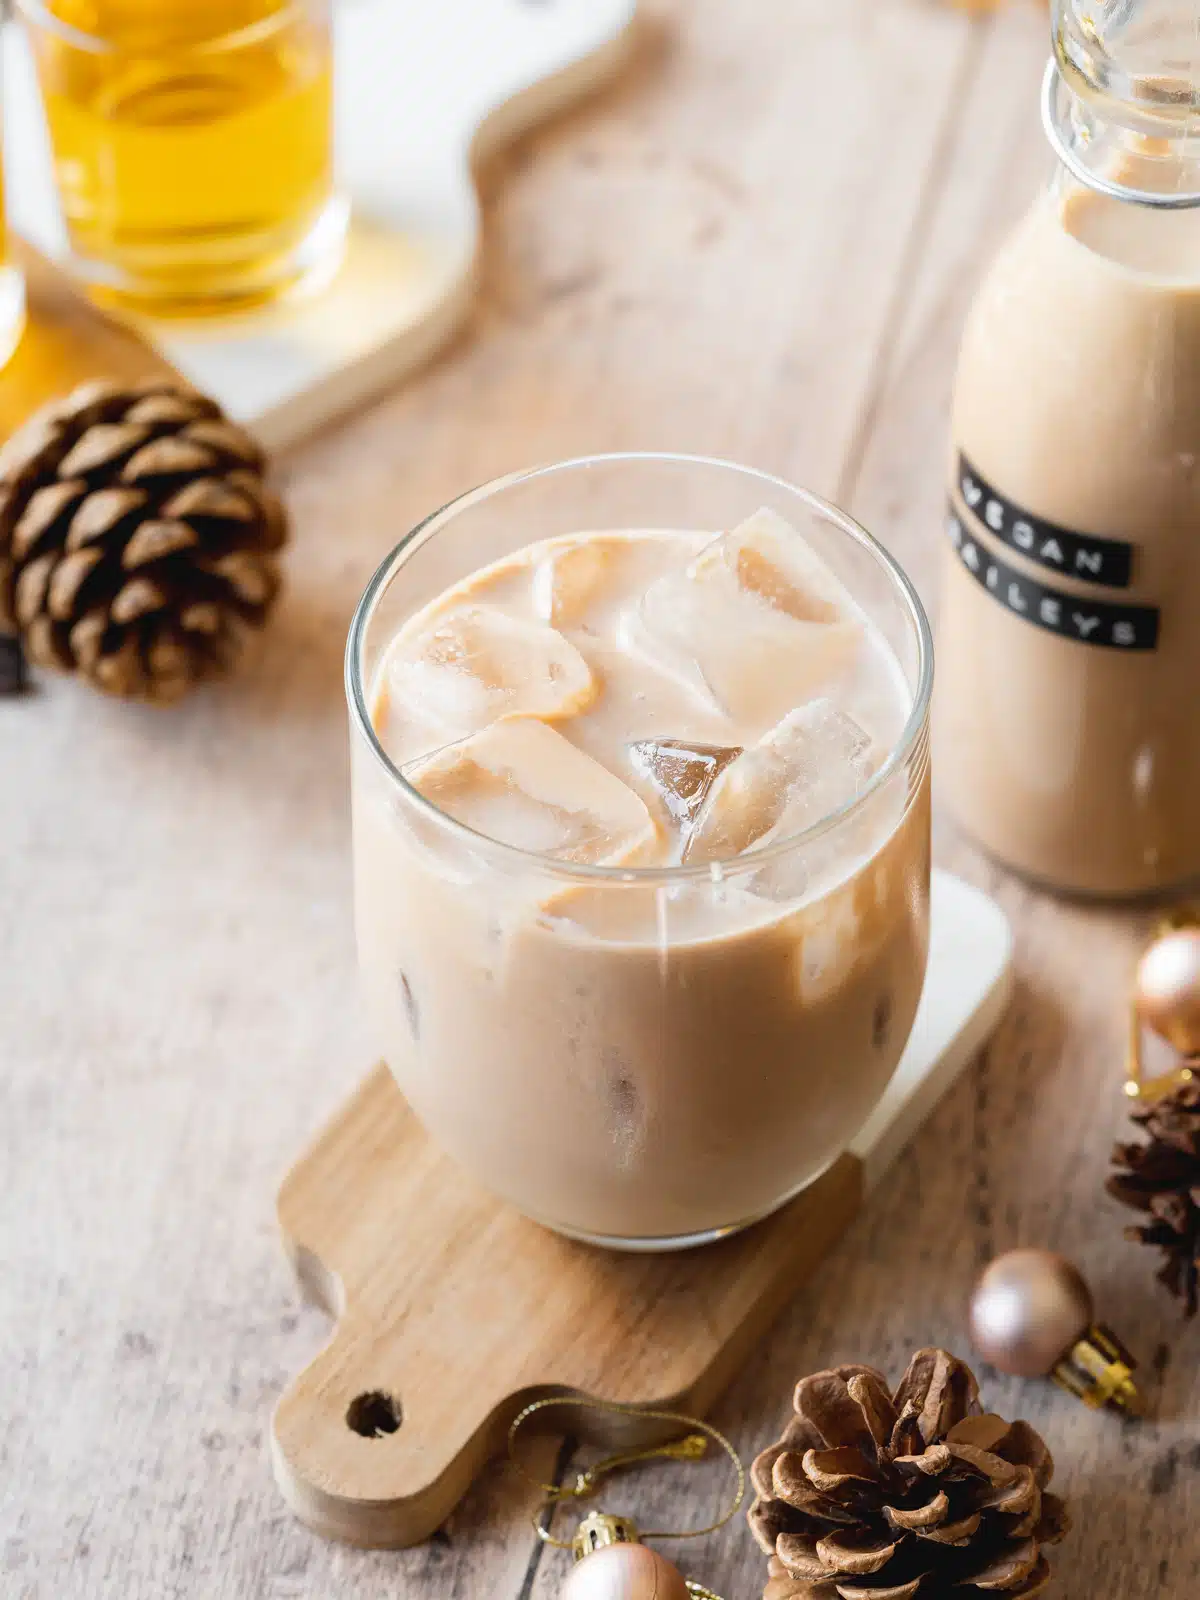 a glass of homemade baileys with ice on a small wooden board.